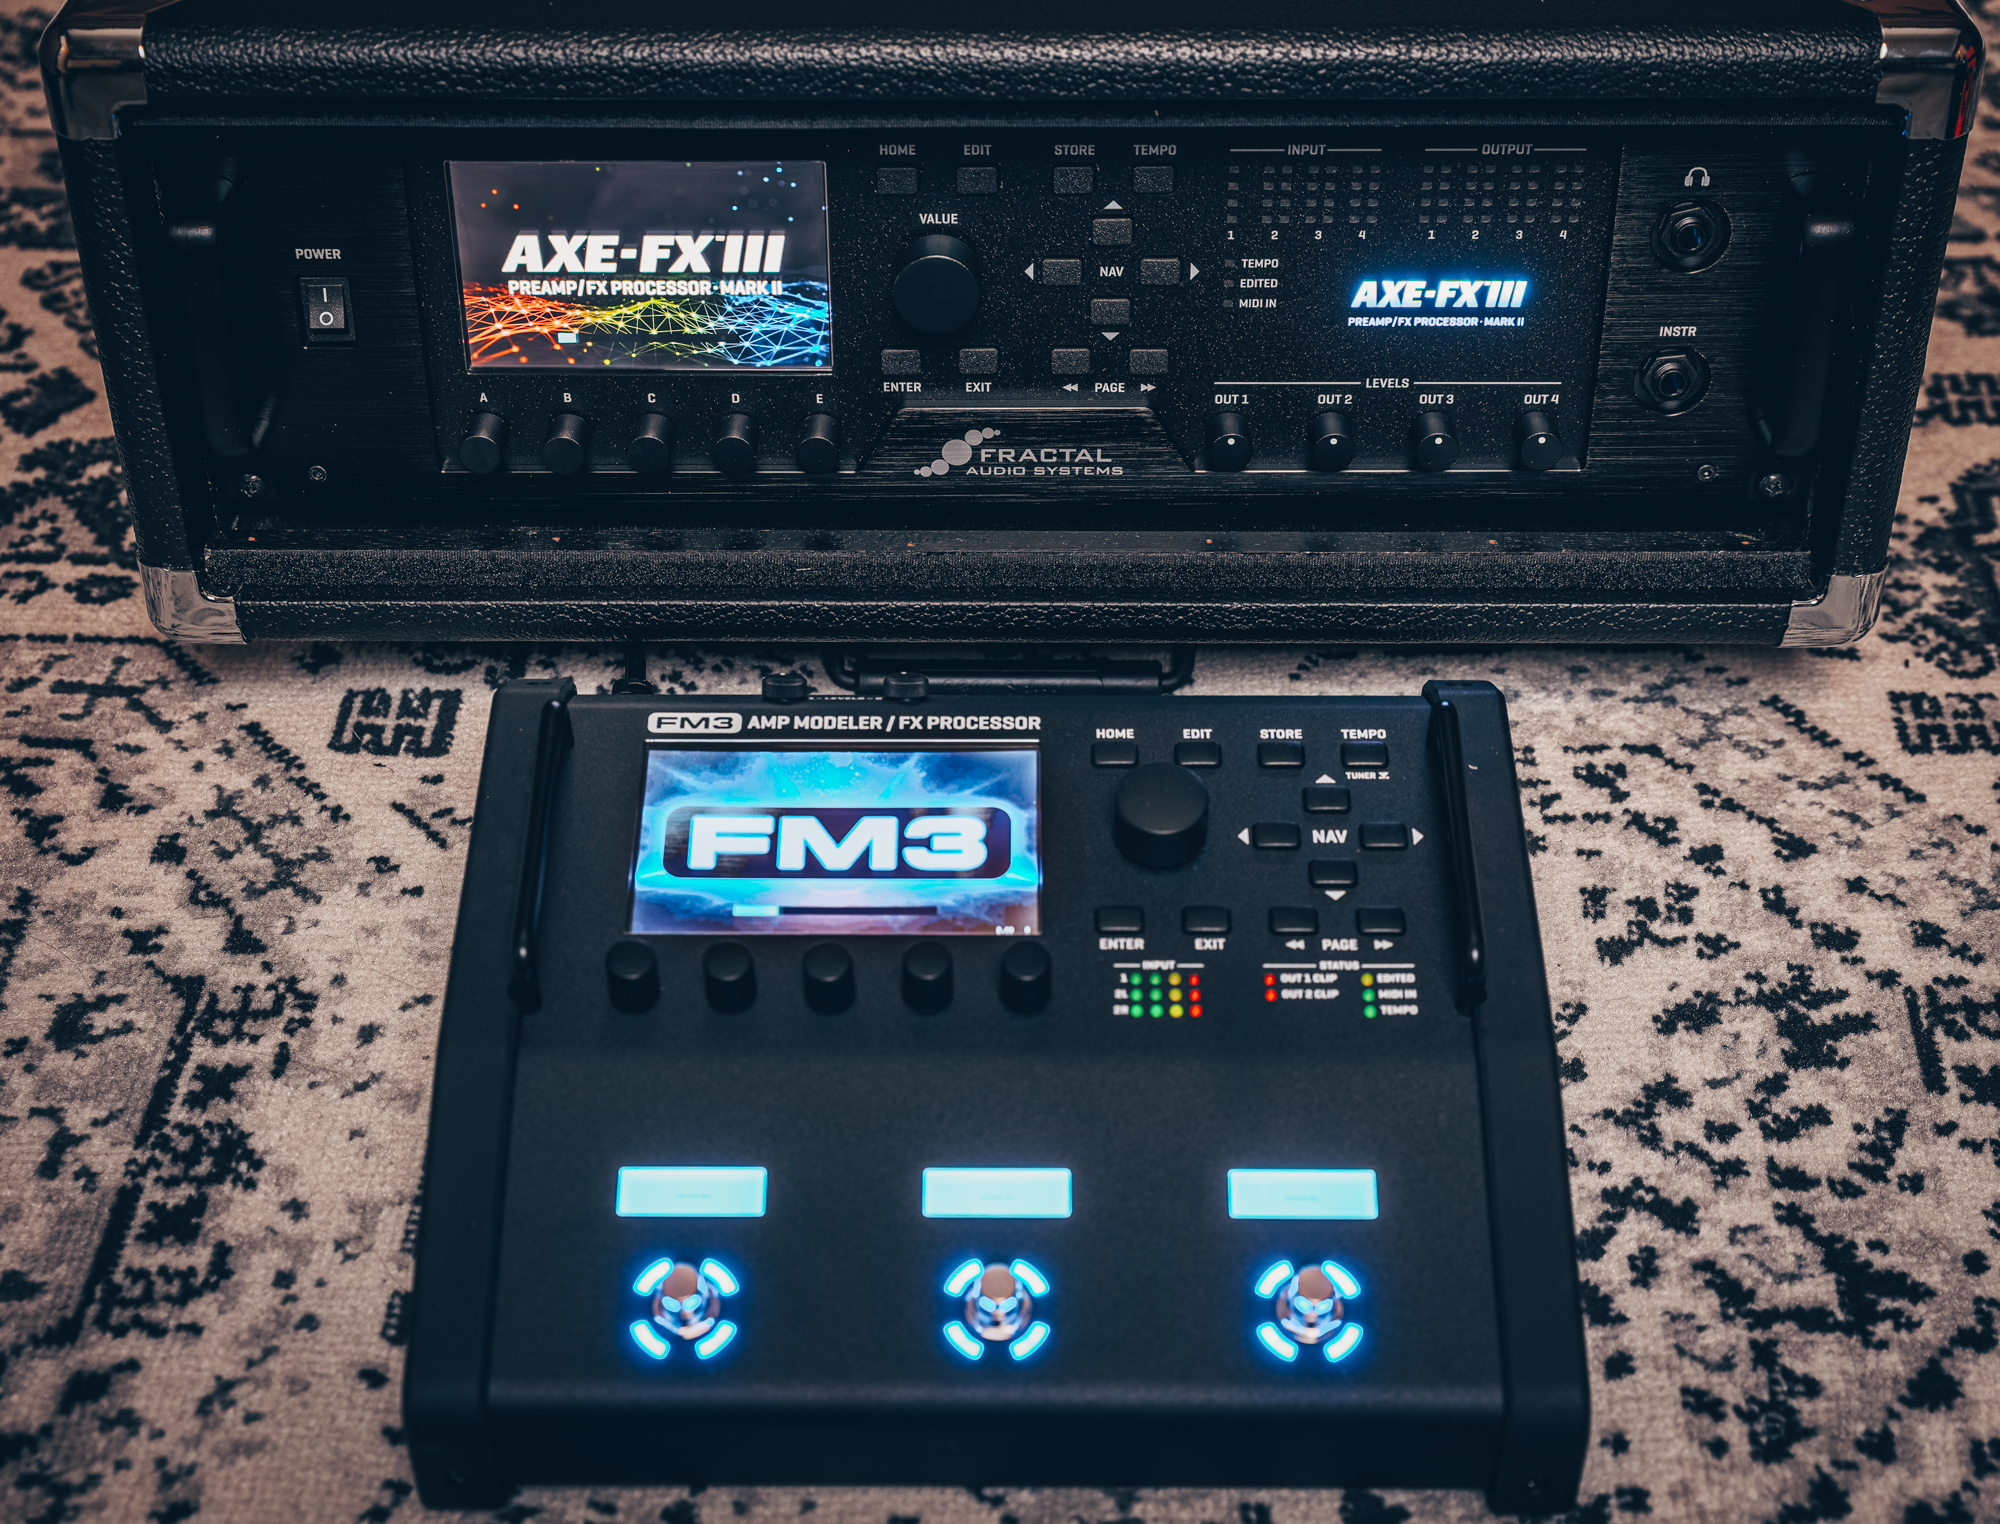 Fractal Audio on Twitter: "Happy New Year from all of us at Fractal Audio! 🥳 The Axe-Fx III Mark II &amp; FM3 are now in stock on https://t.co/pH8NzksJfv https://t.co/AWShfs54PD" / Twitter